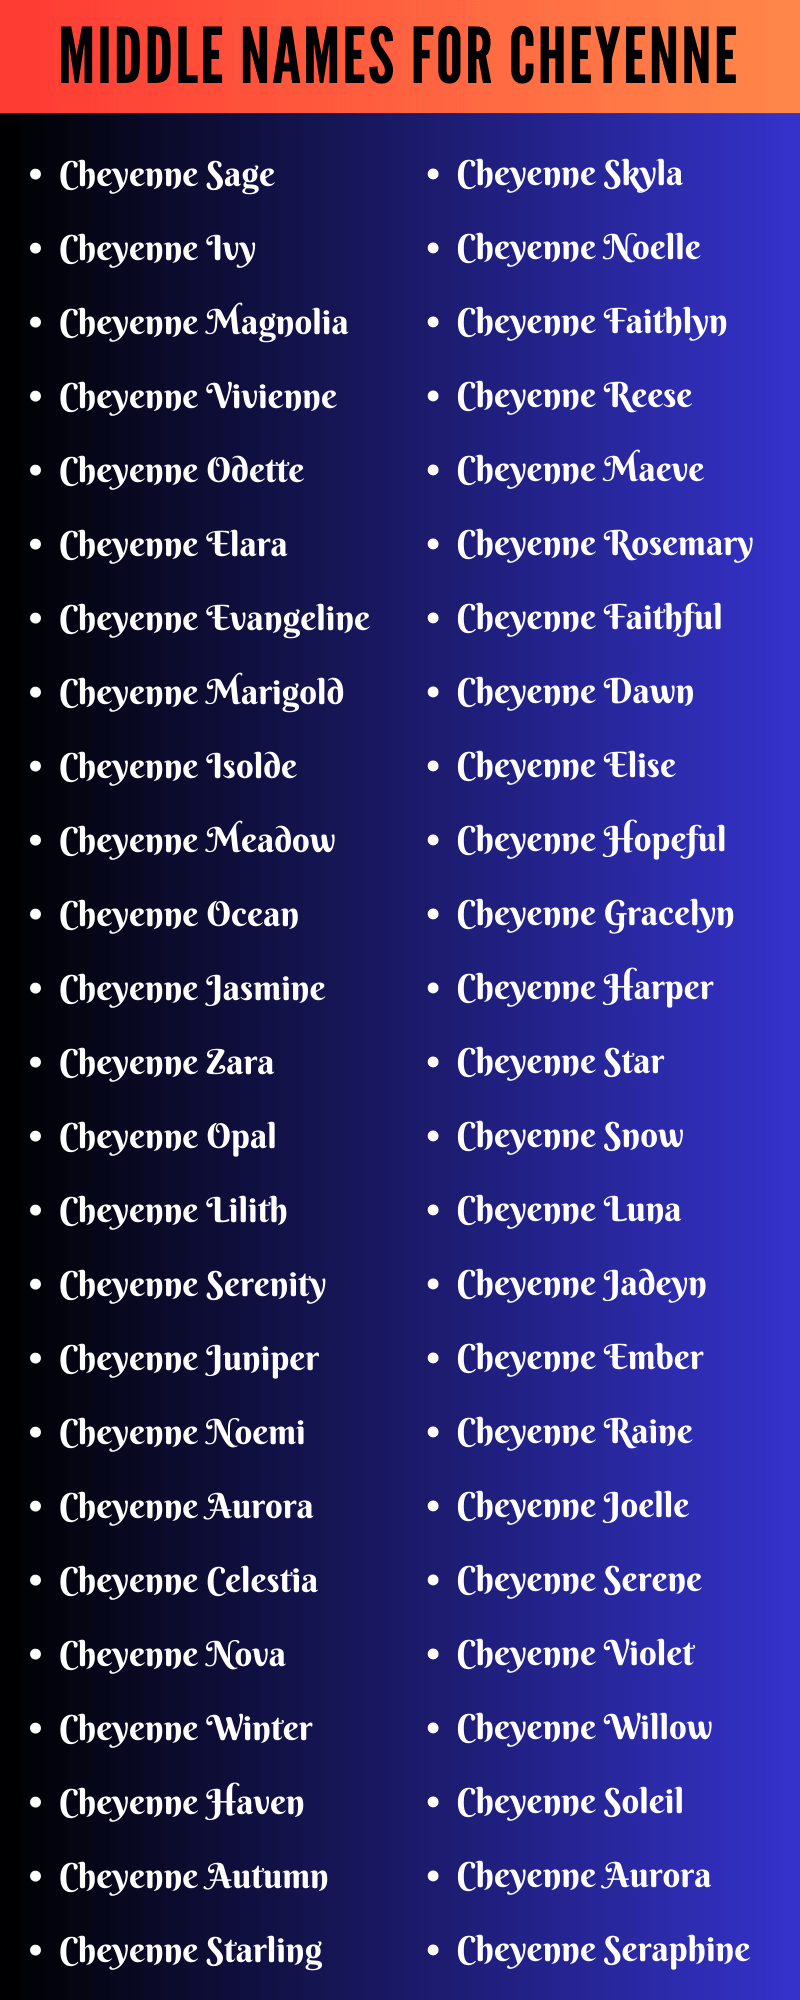 Middle Names For Cheyenne